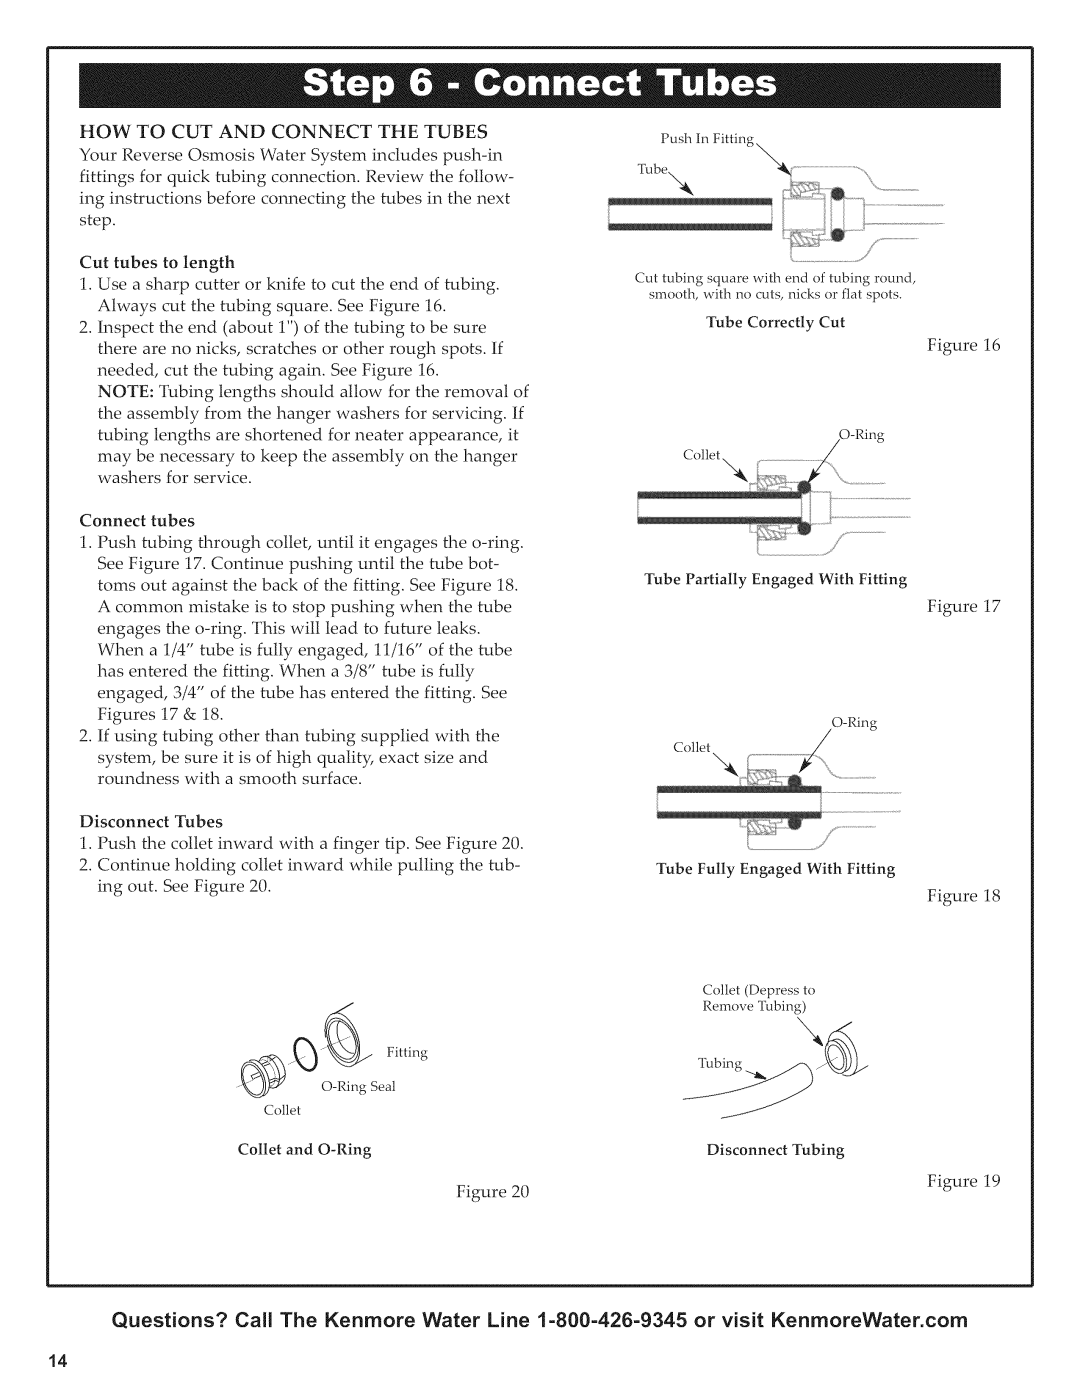 Kenmore 625.38556 owner manual How To Cut And Connect The Tubes 